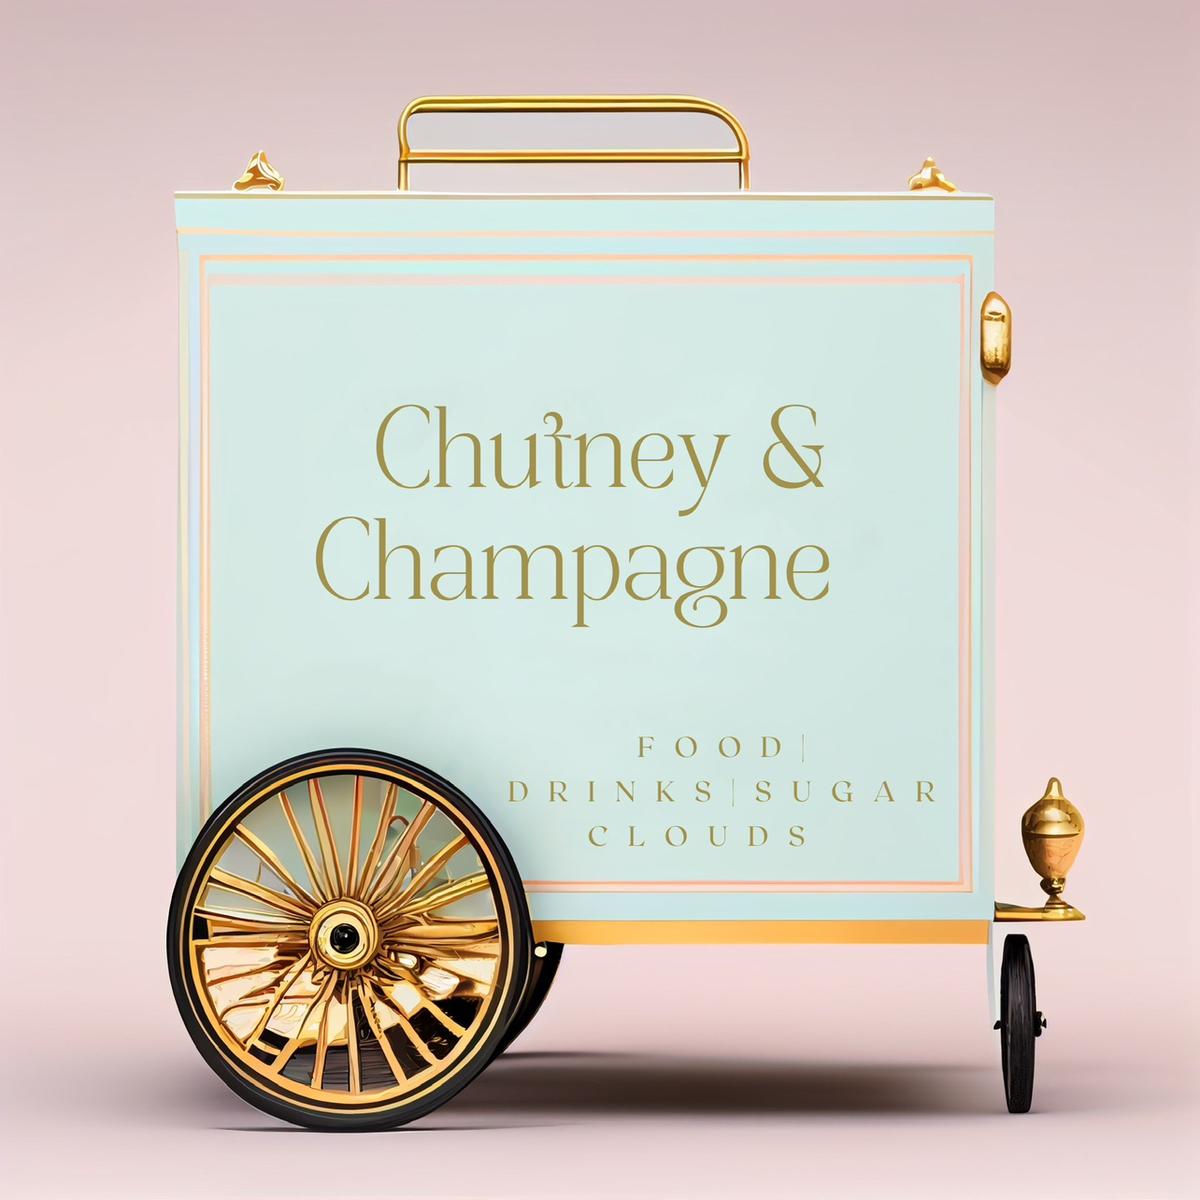 Chutney&Champs 's images